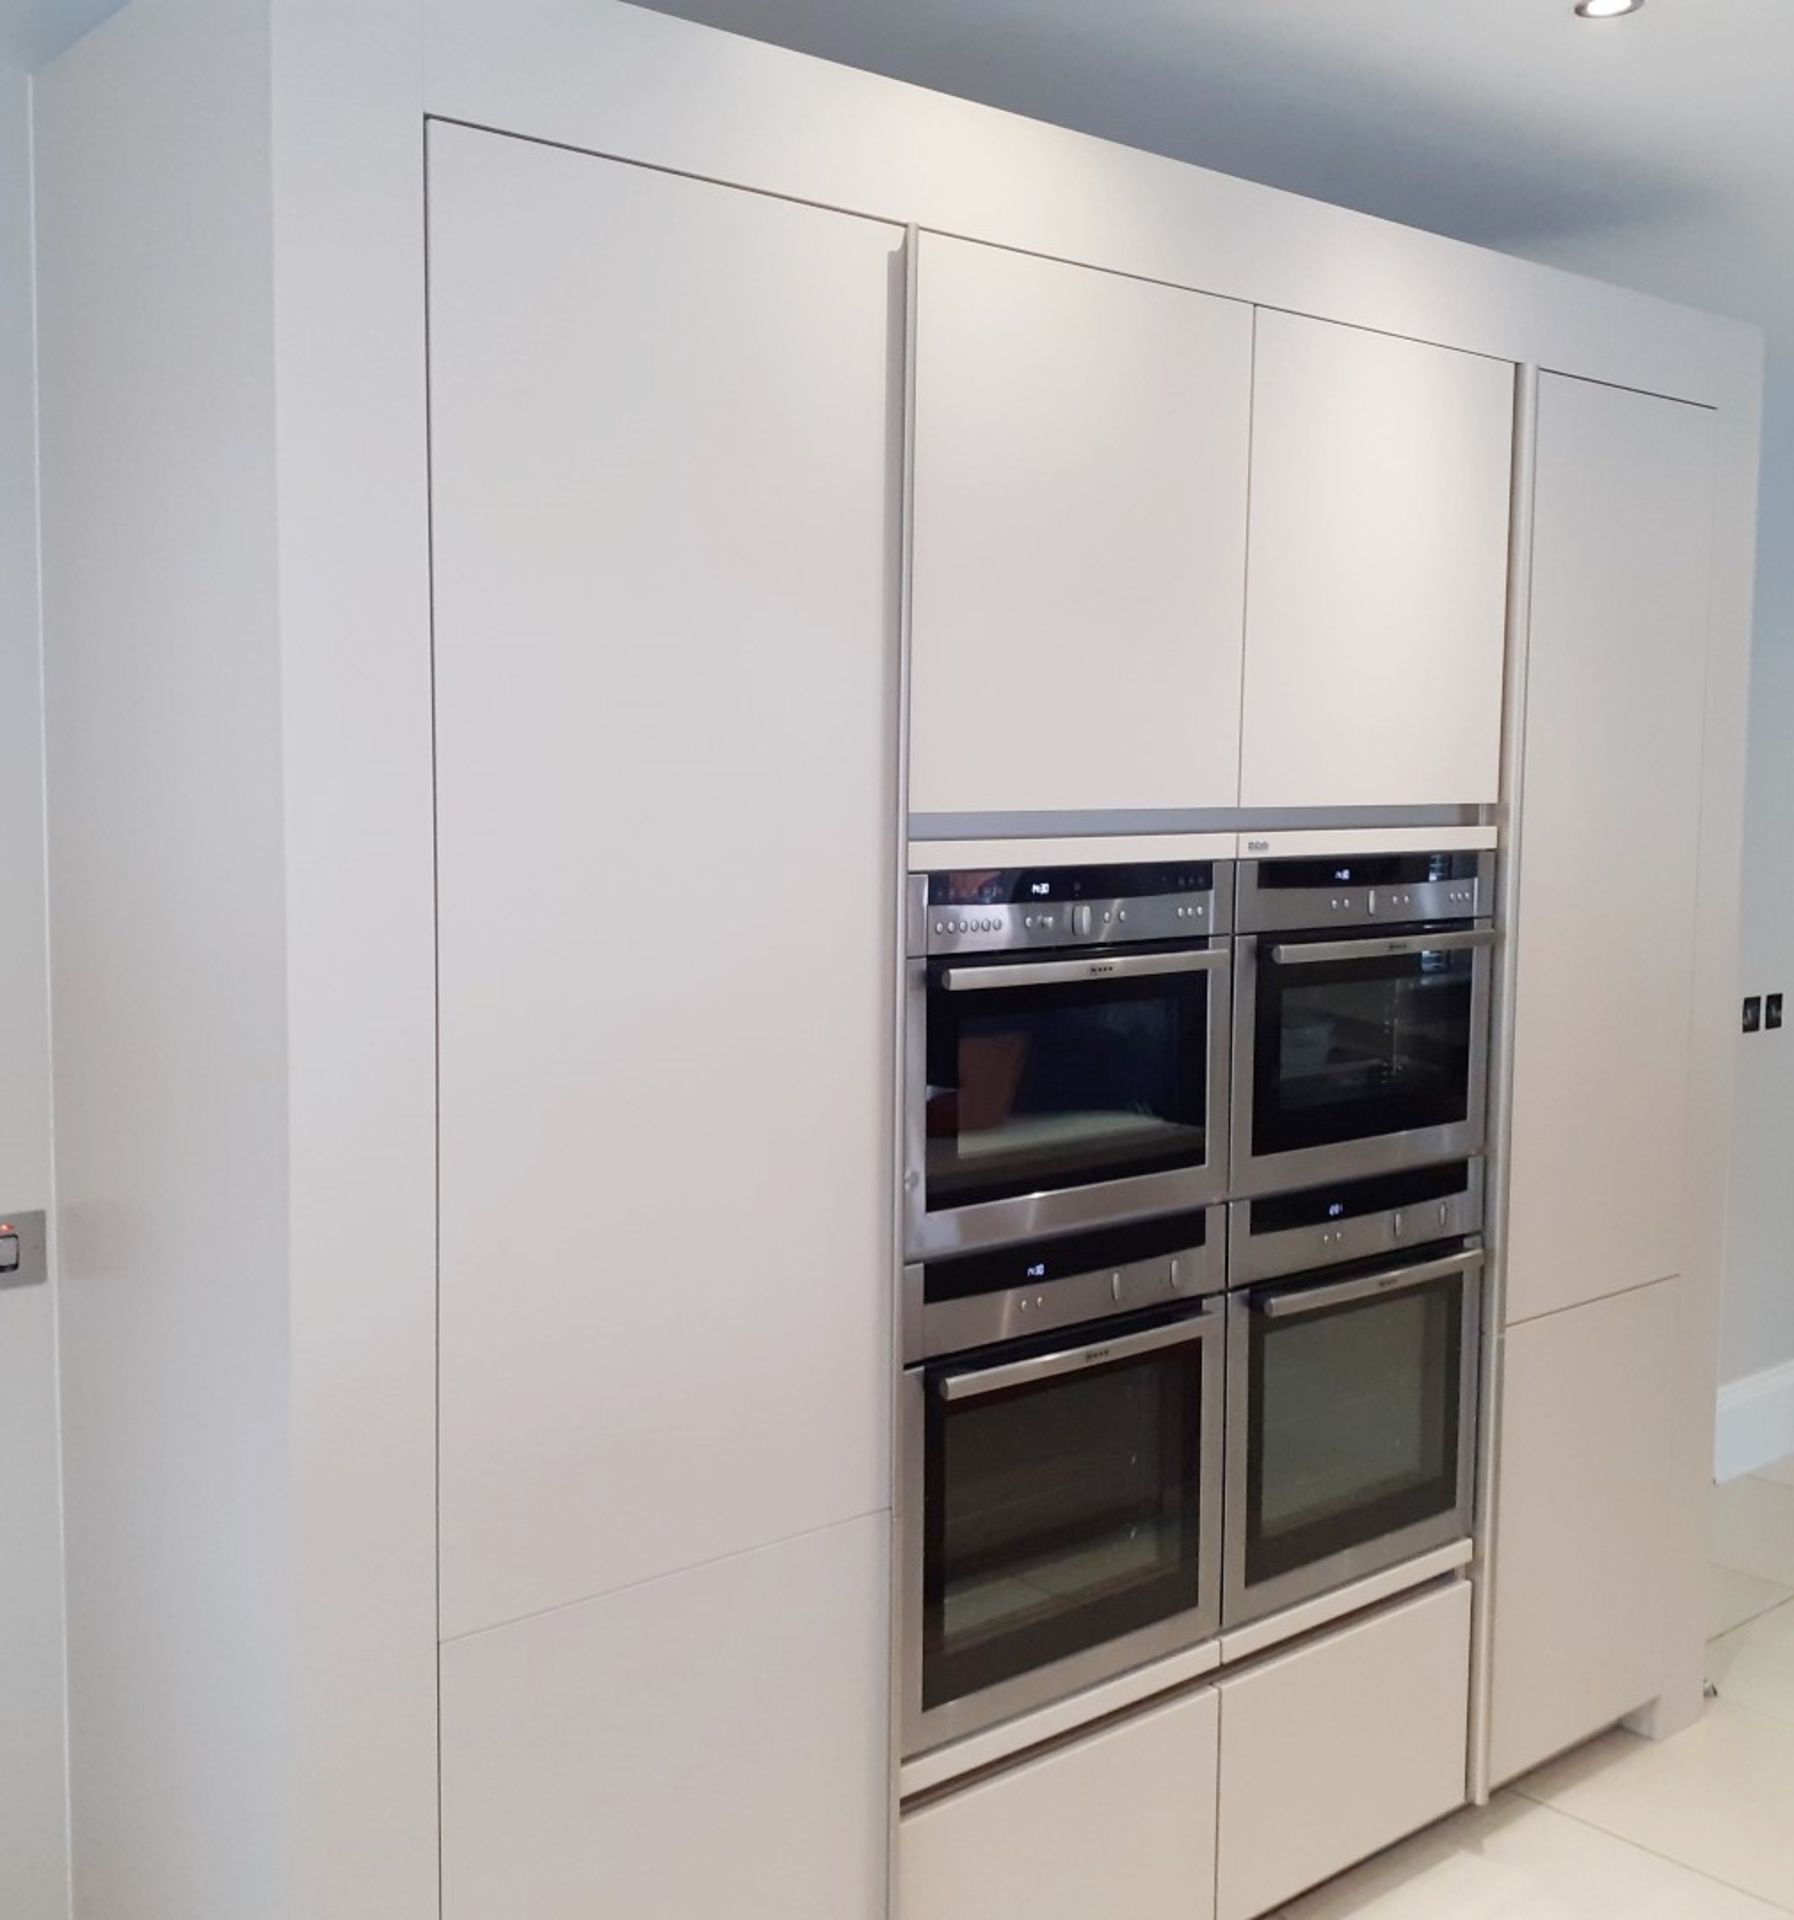 1 x SieMatic Handleless Fitted Kitchen With Intergrated NEFF Appliances, Corian Worktops And Island - Image 12 of 92